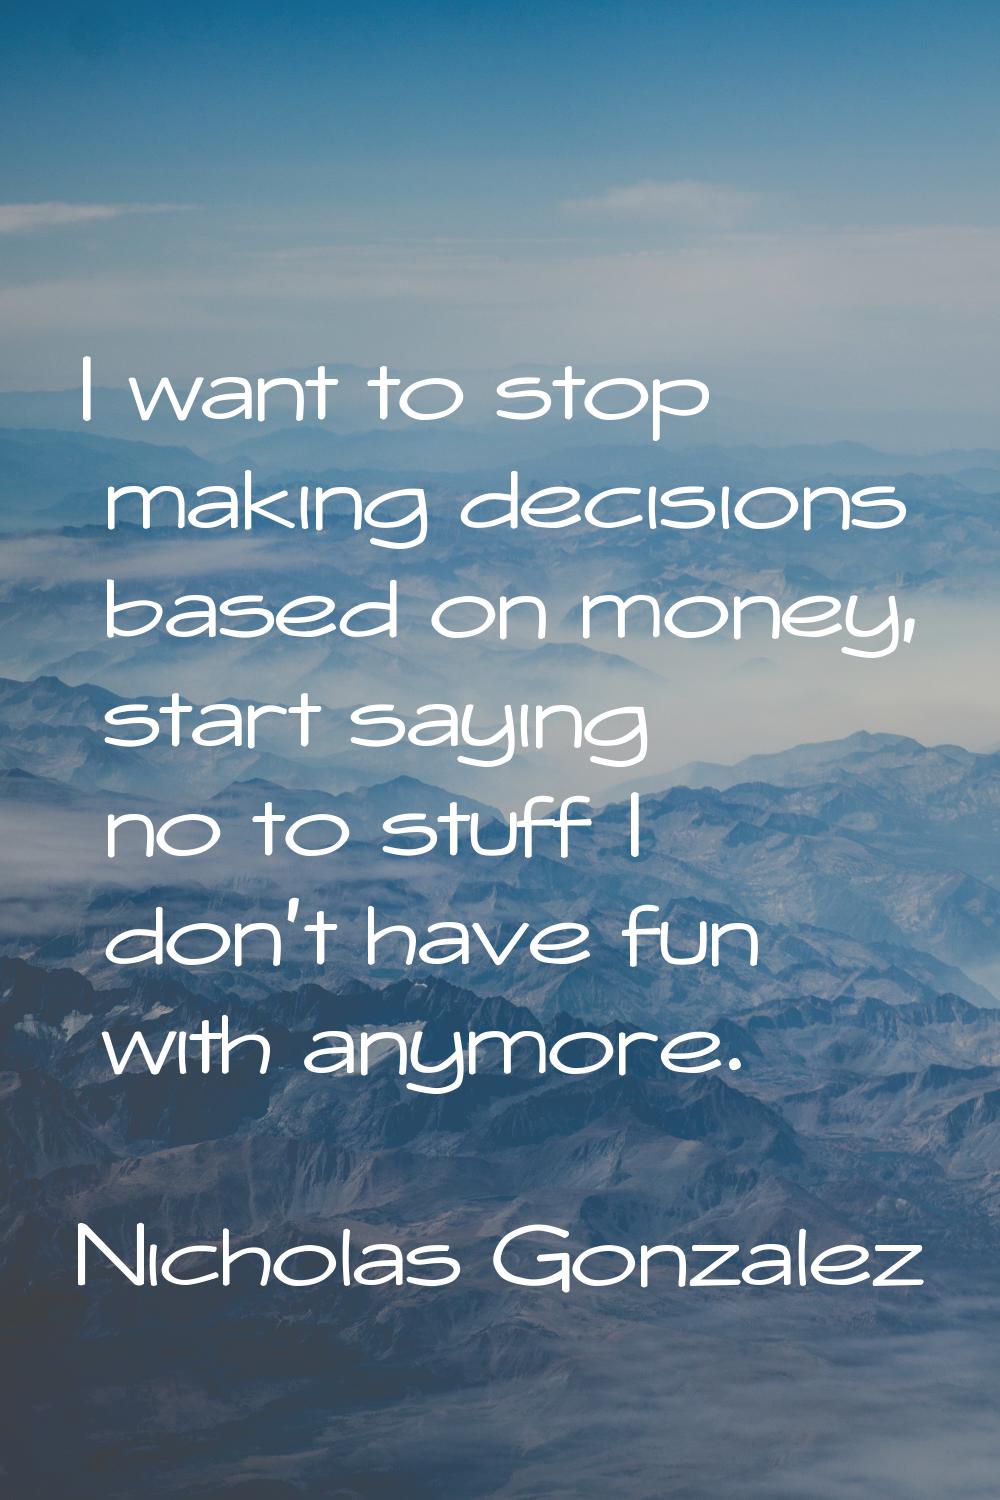 I want to stop making decisions based on money, start saying no to stuff I don't have fun with anym